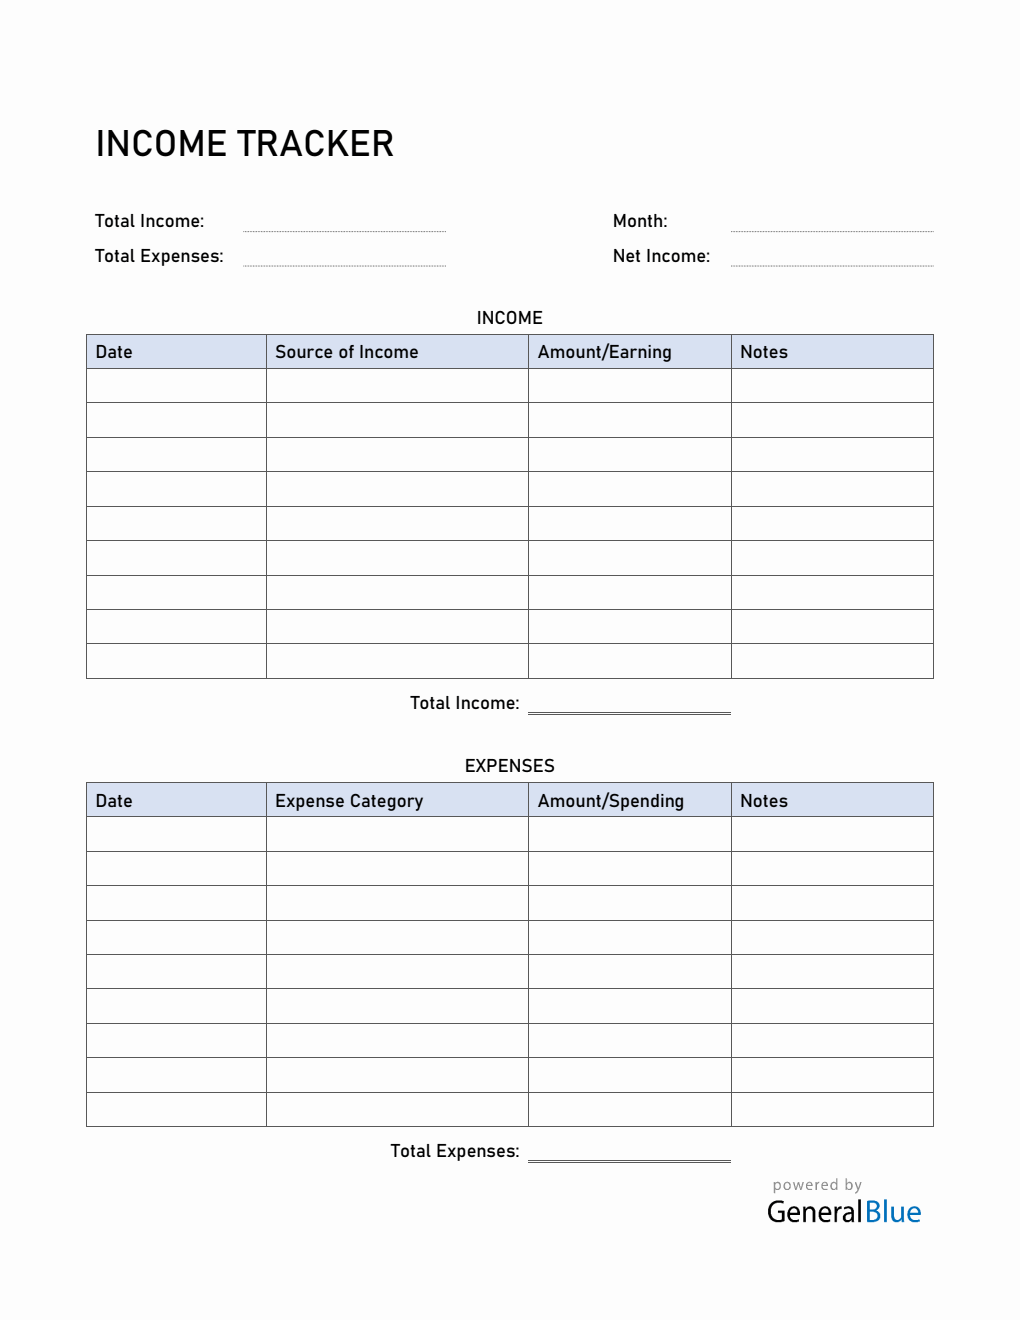 Simple Income Tracker in Word